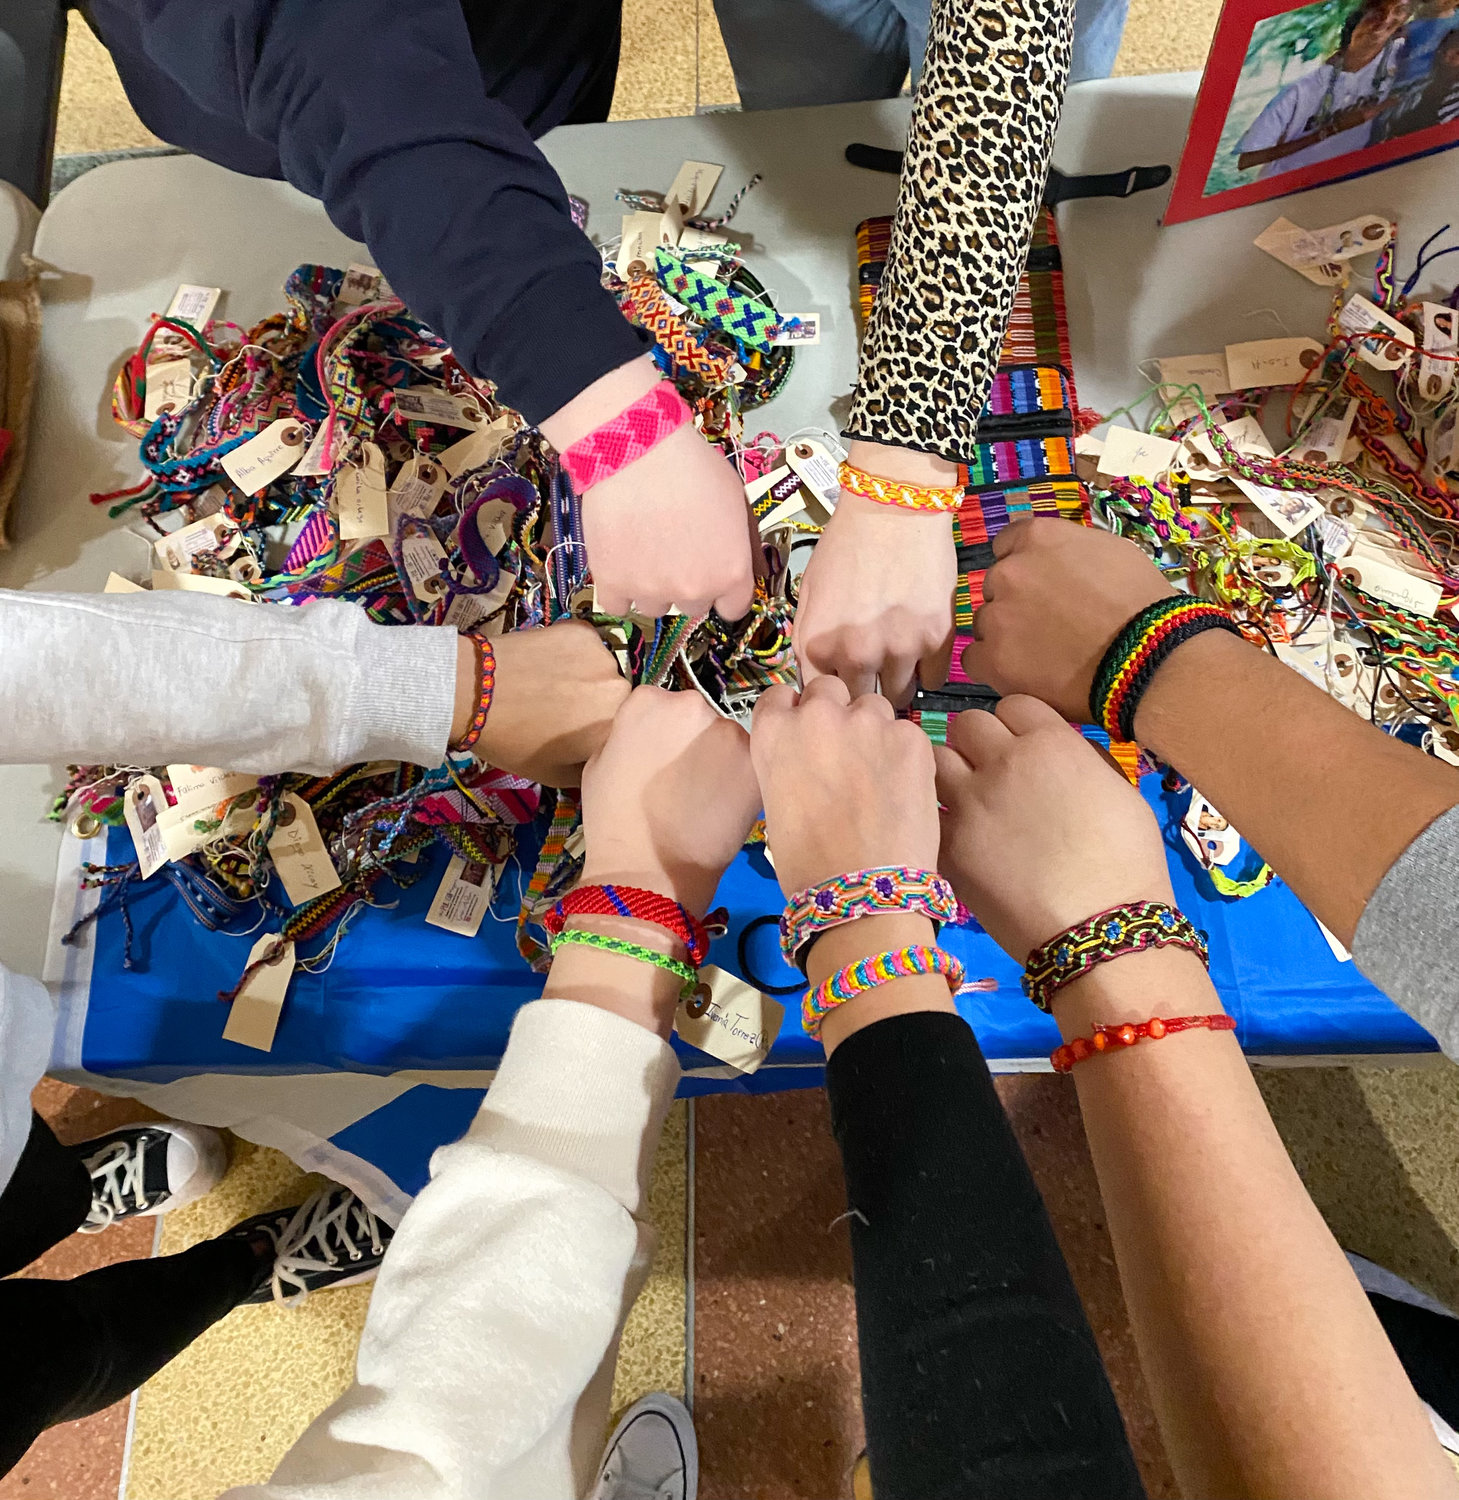 The bracelets were handmade with colorful threads.